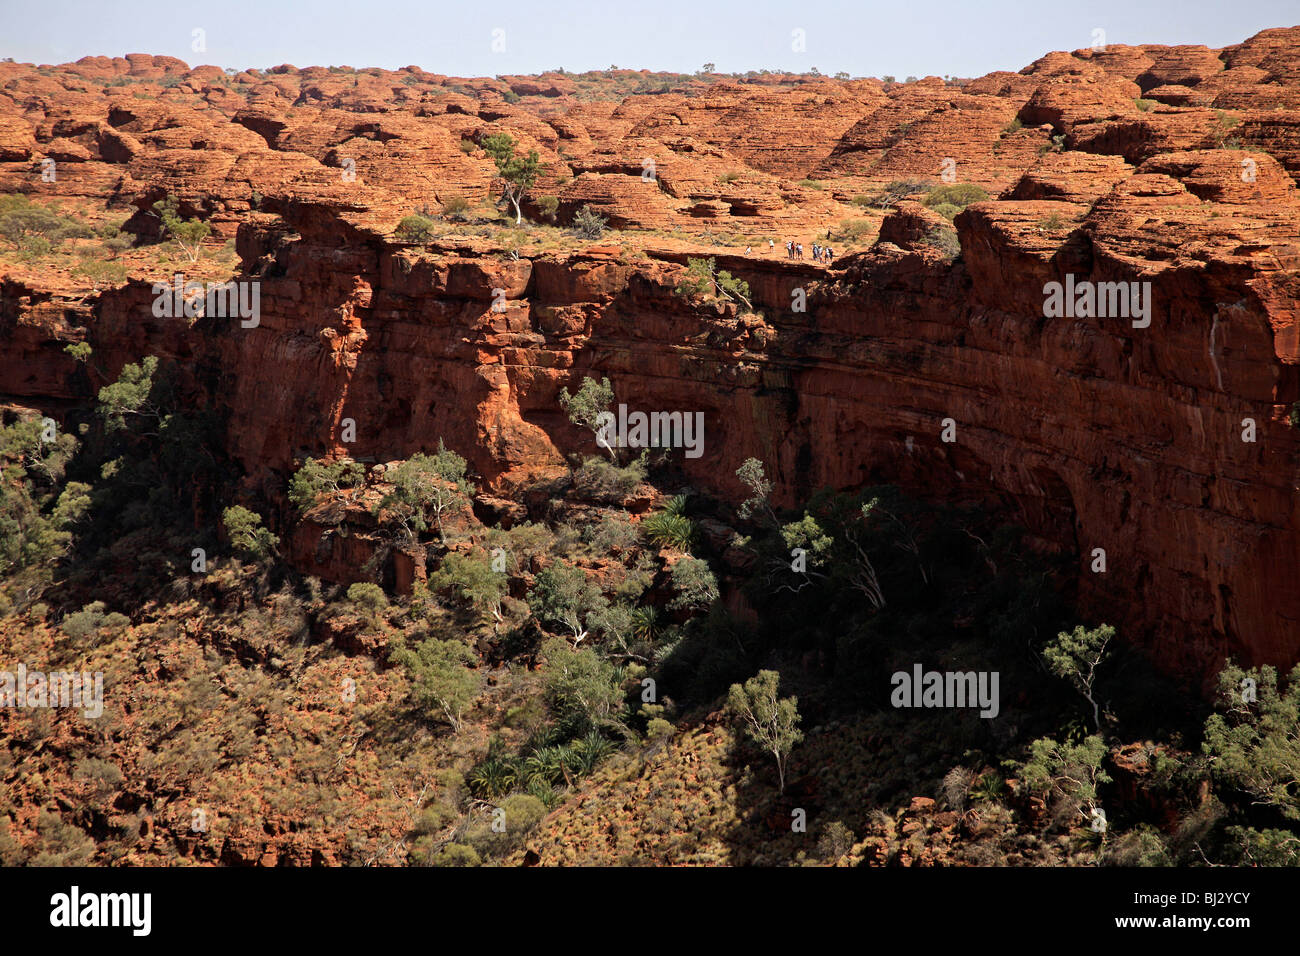 giant Kings Canyon, part of the Watarrka National Park , Northern Territory, Australia Stock Photo